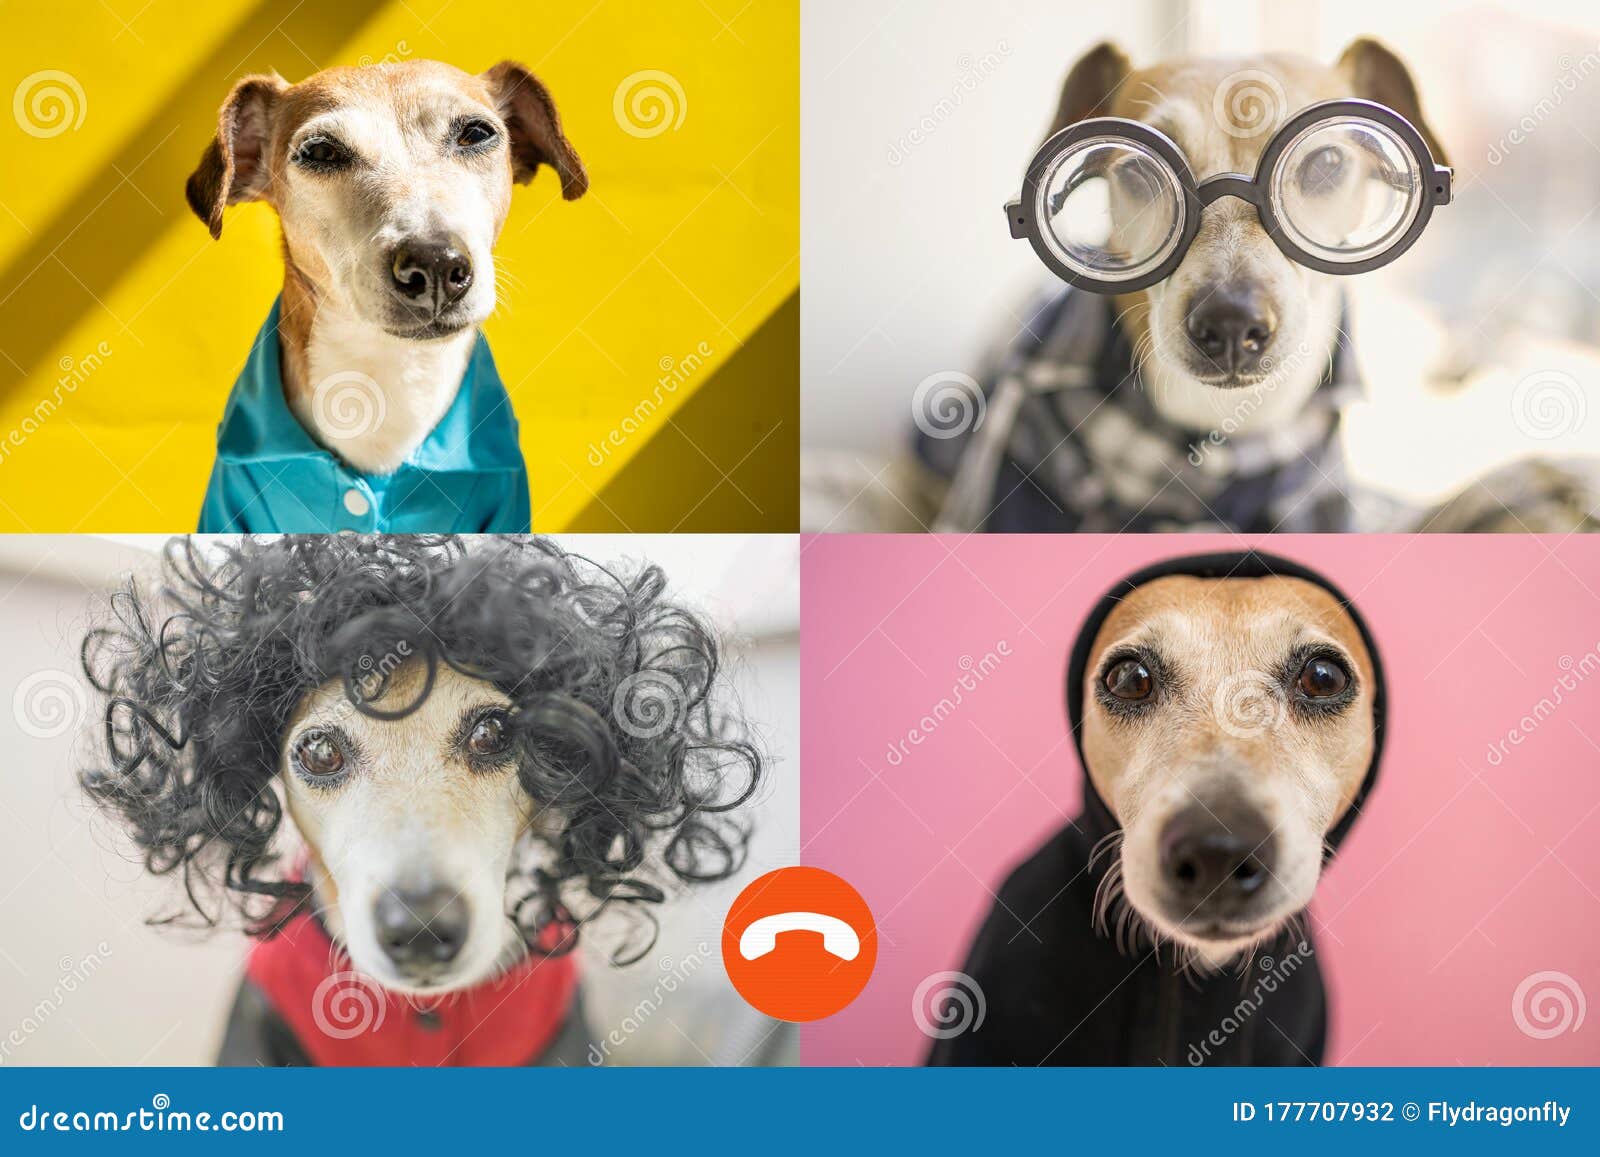 Funny Dog Copy Online Group Chat Conference. Stock Photo - Image ...